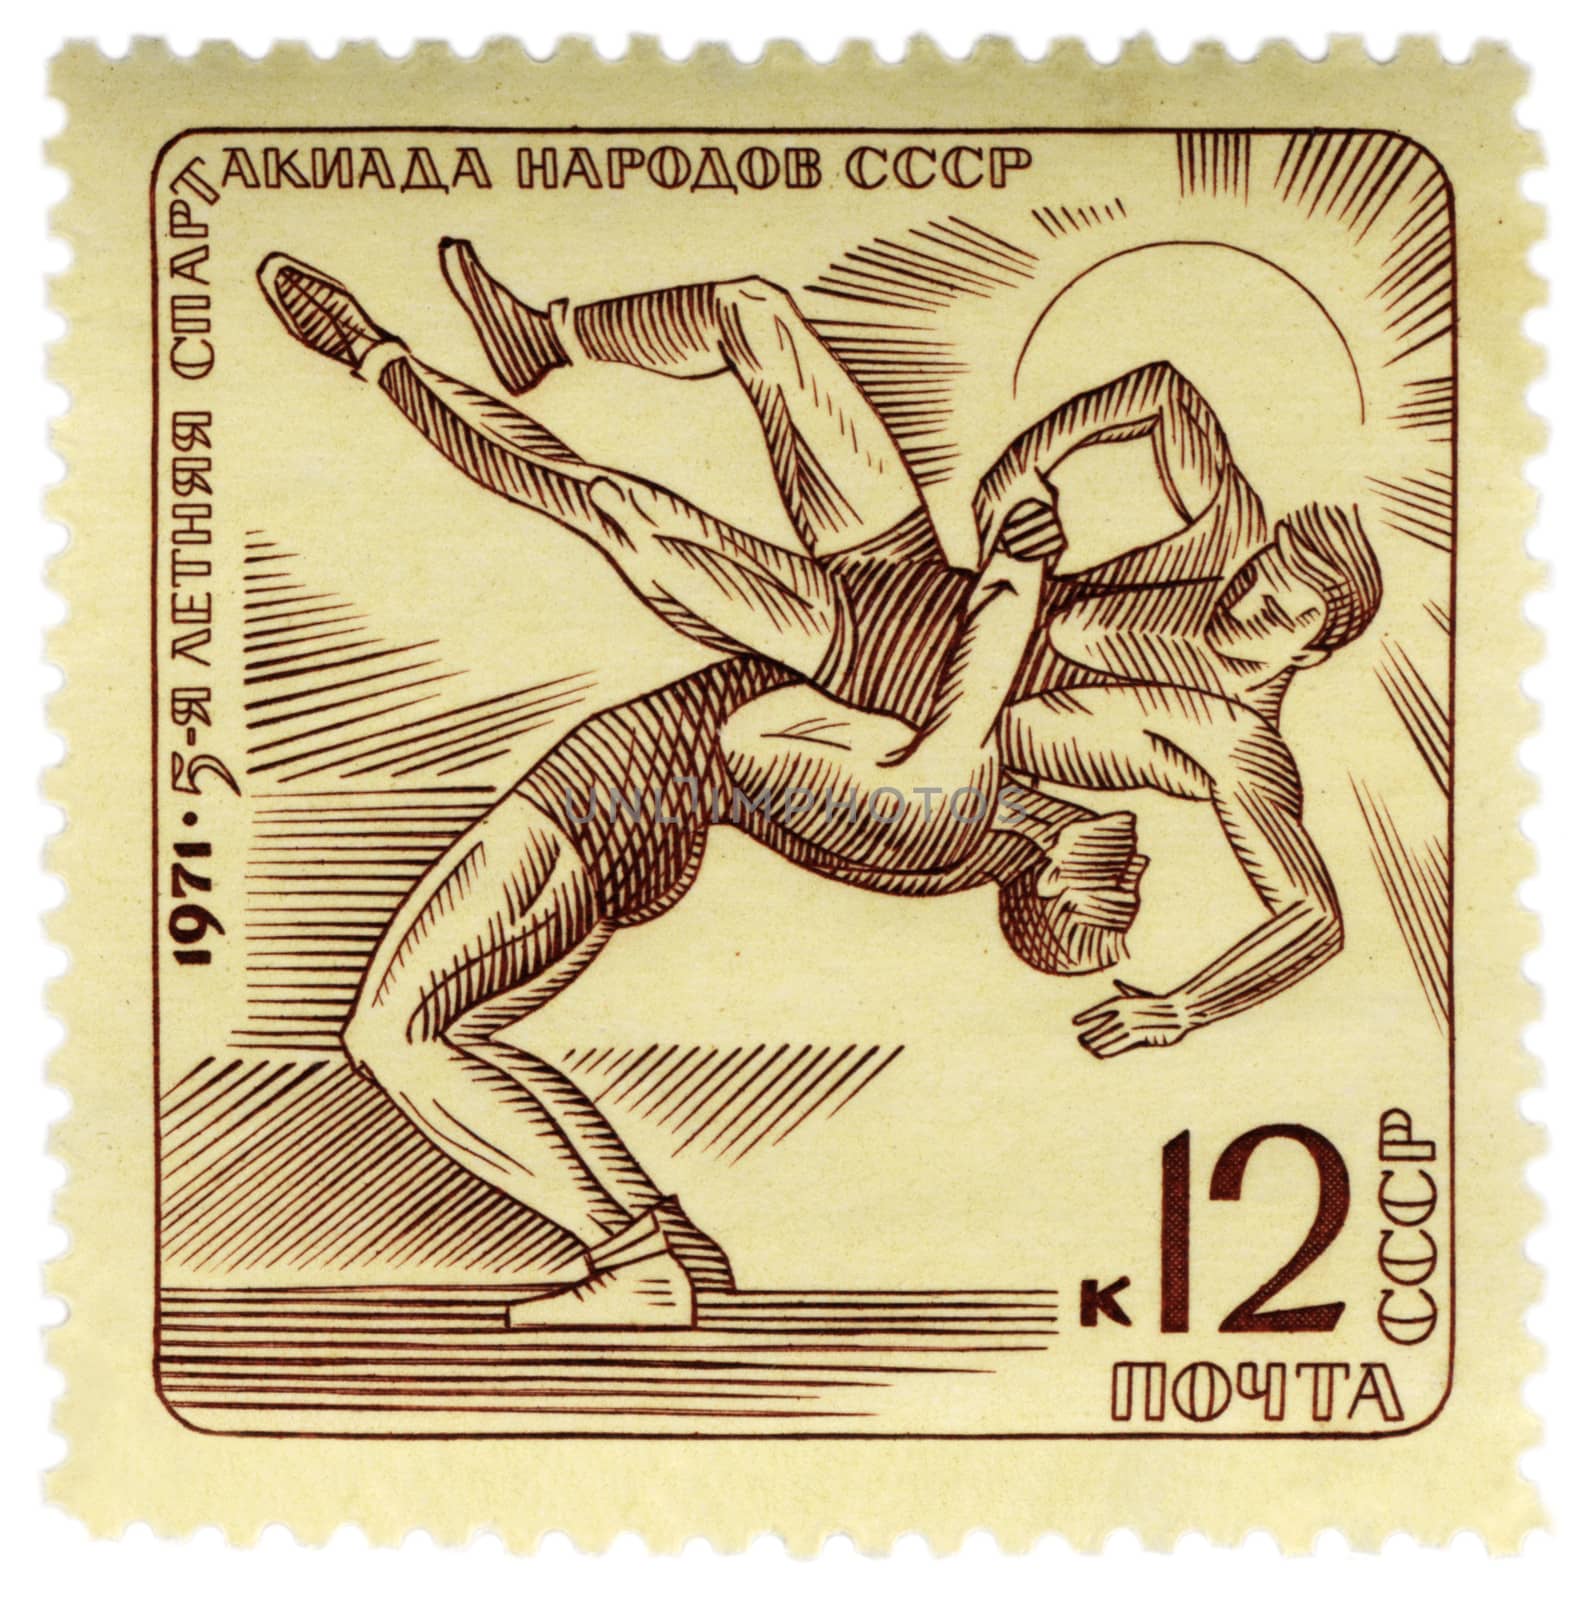 Wrestling on post stamp by wander